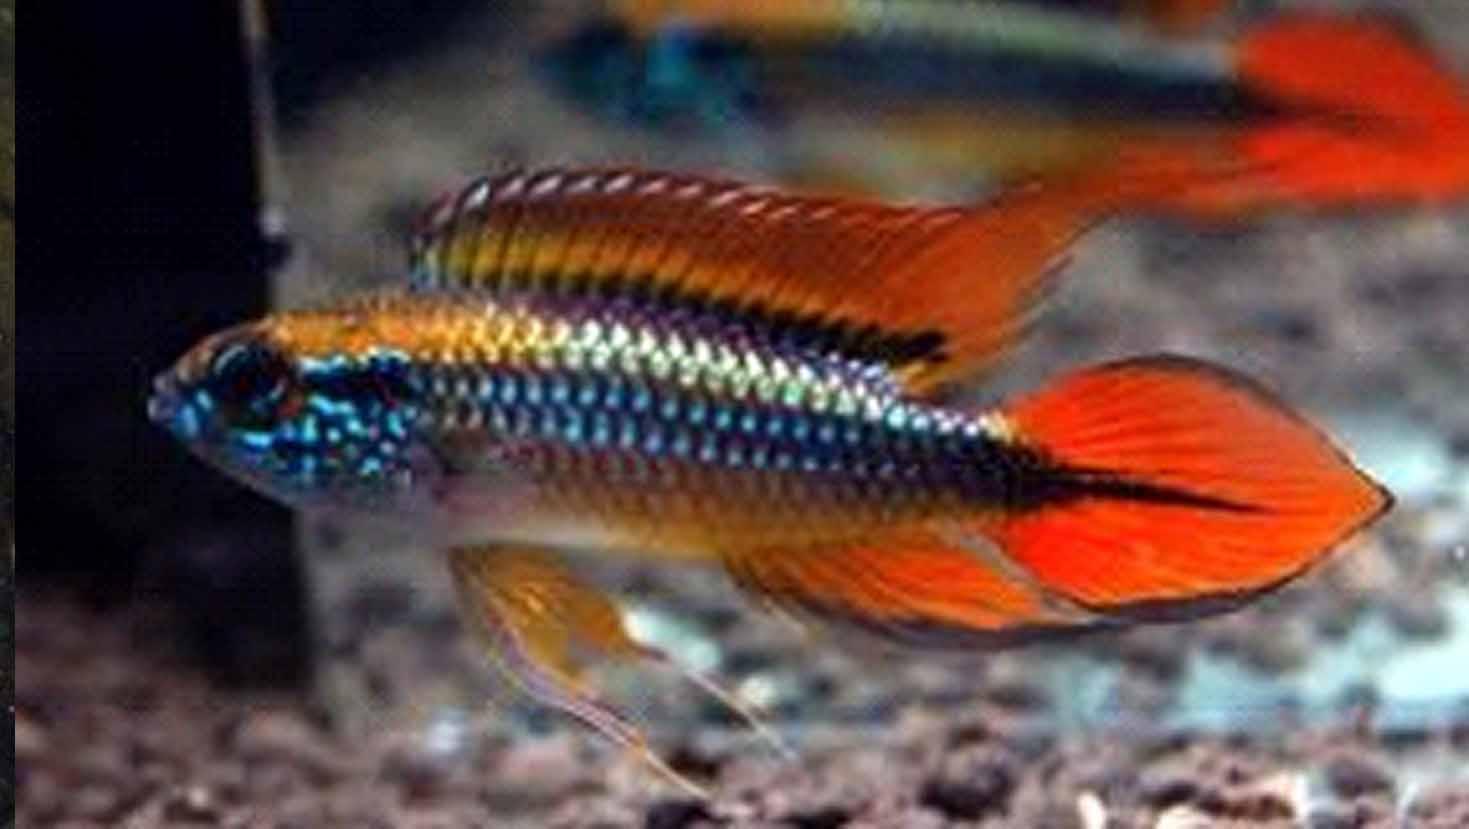 APISTOGRAMMA AGASSIZI DOUBLE RED - Click to enlarge